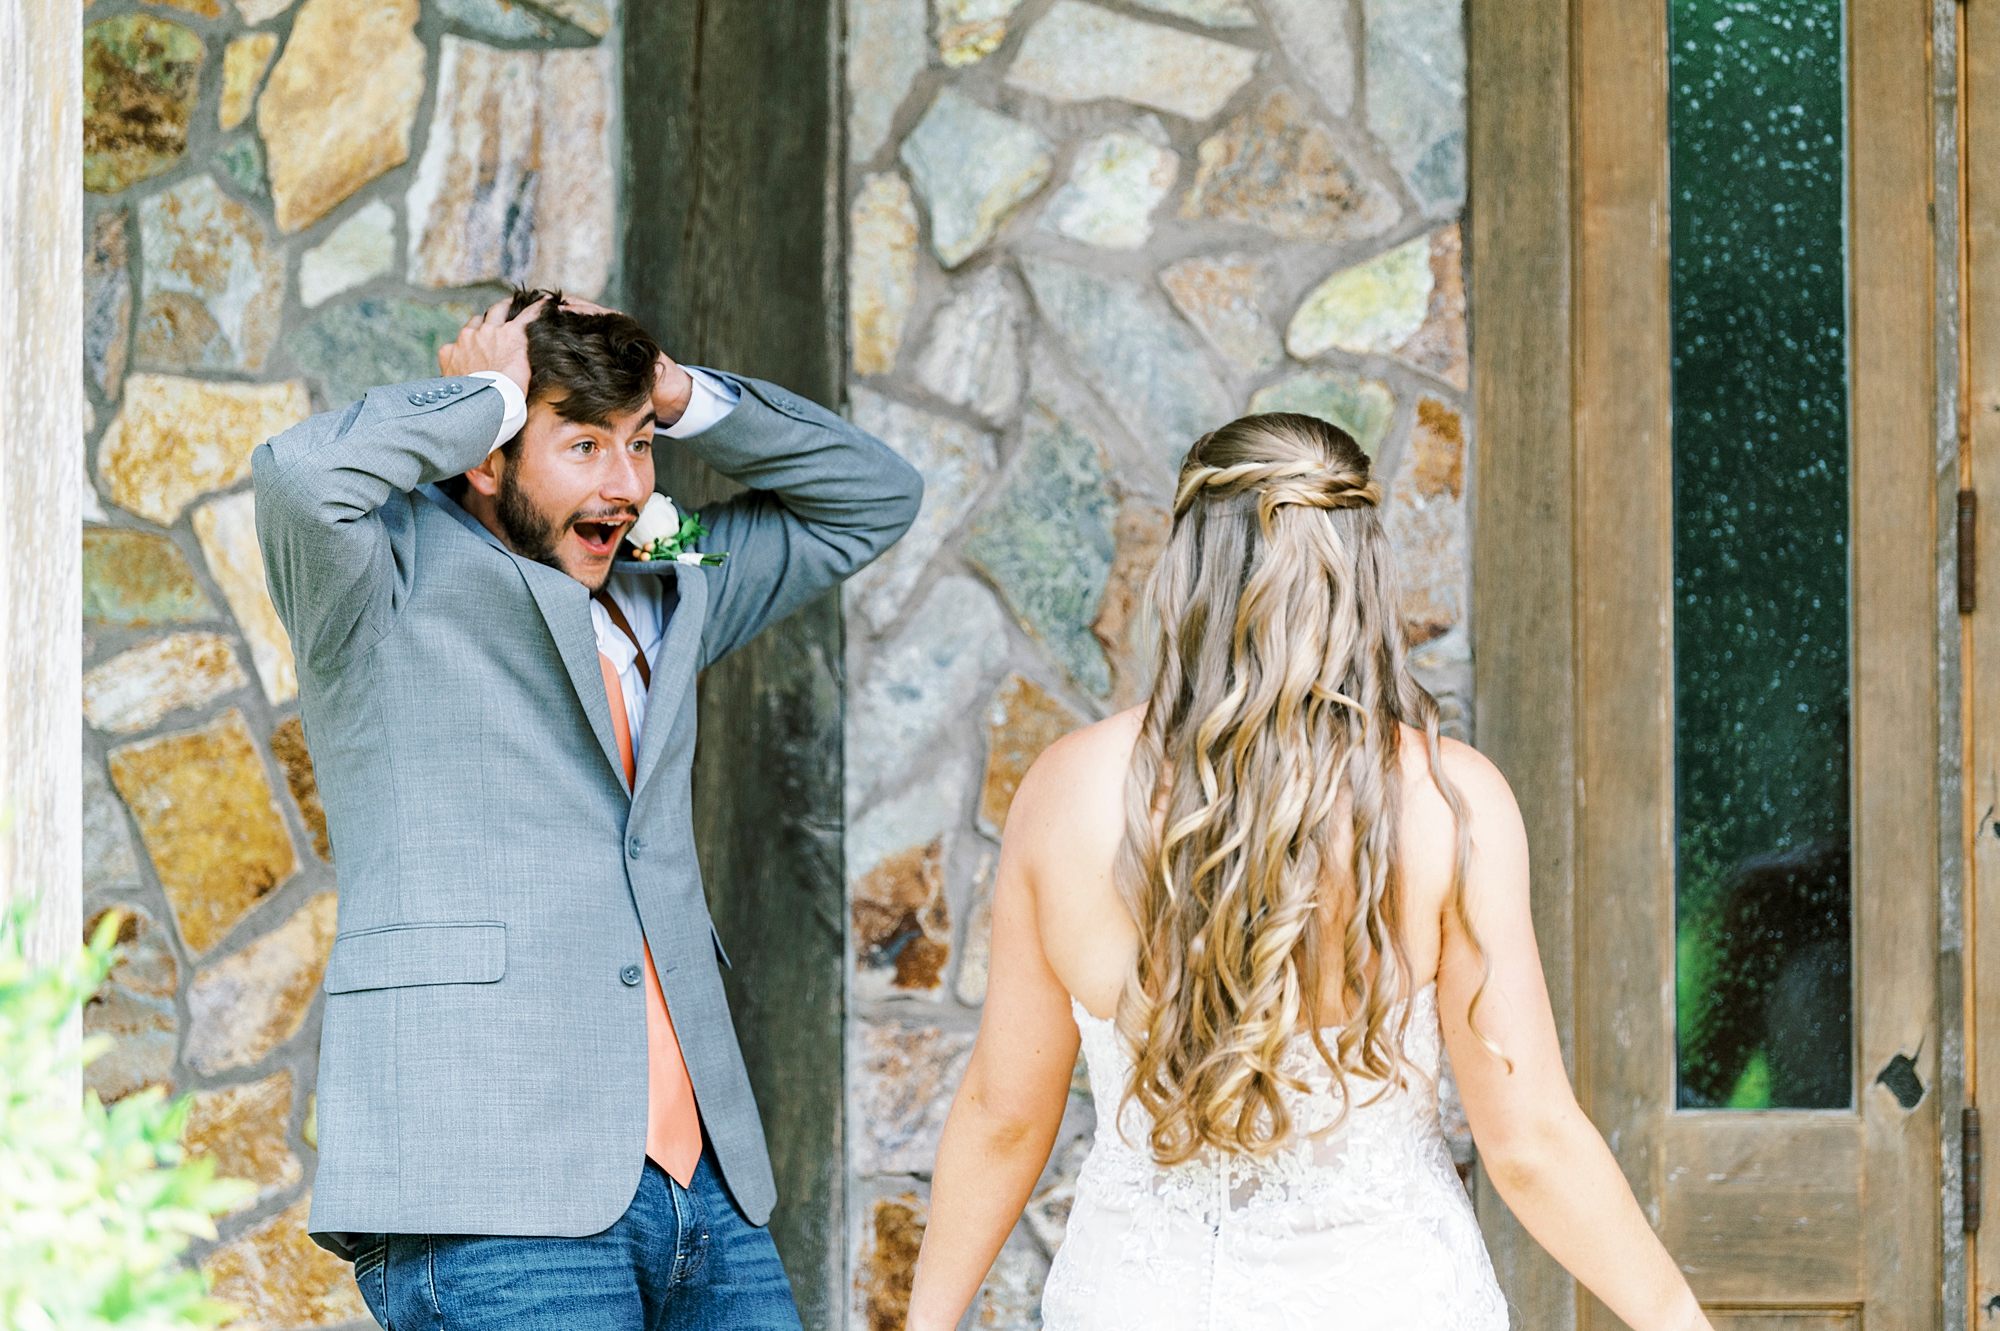 brother reacts to seeing bride during first look